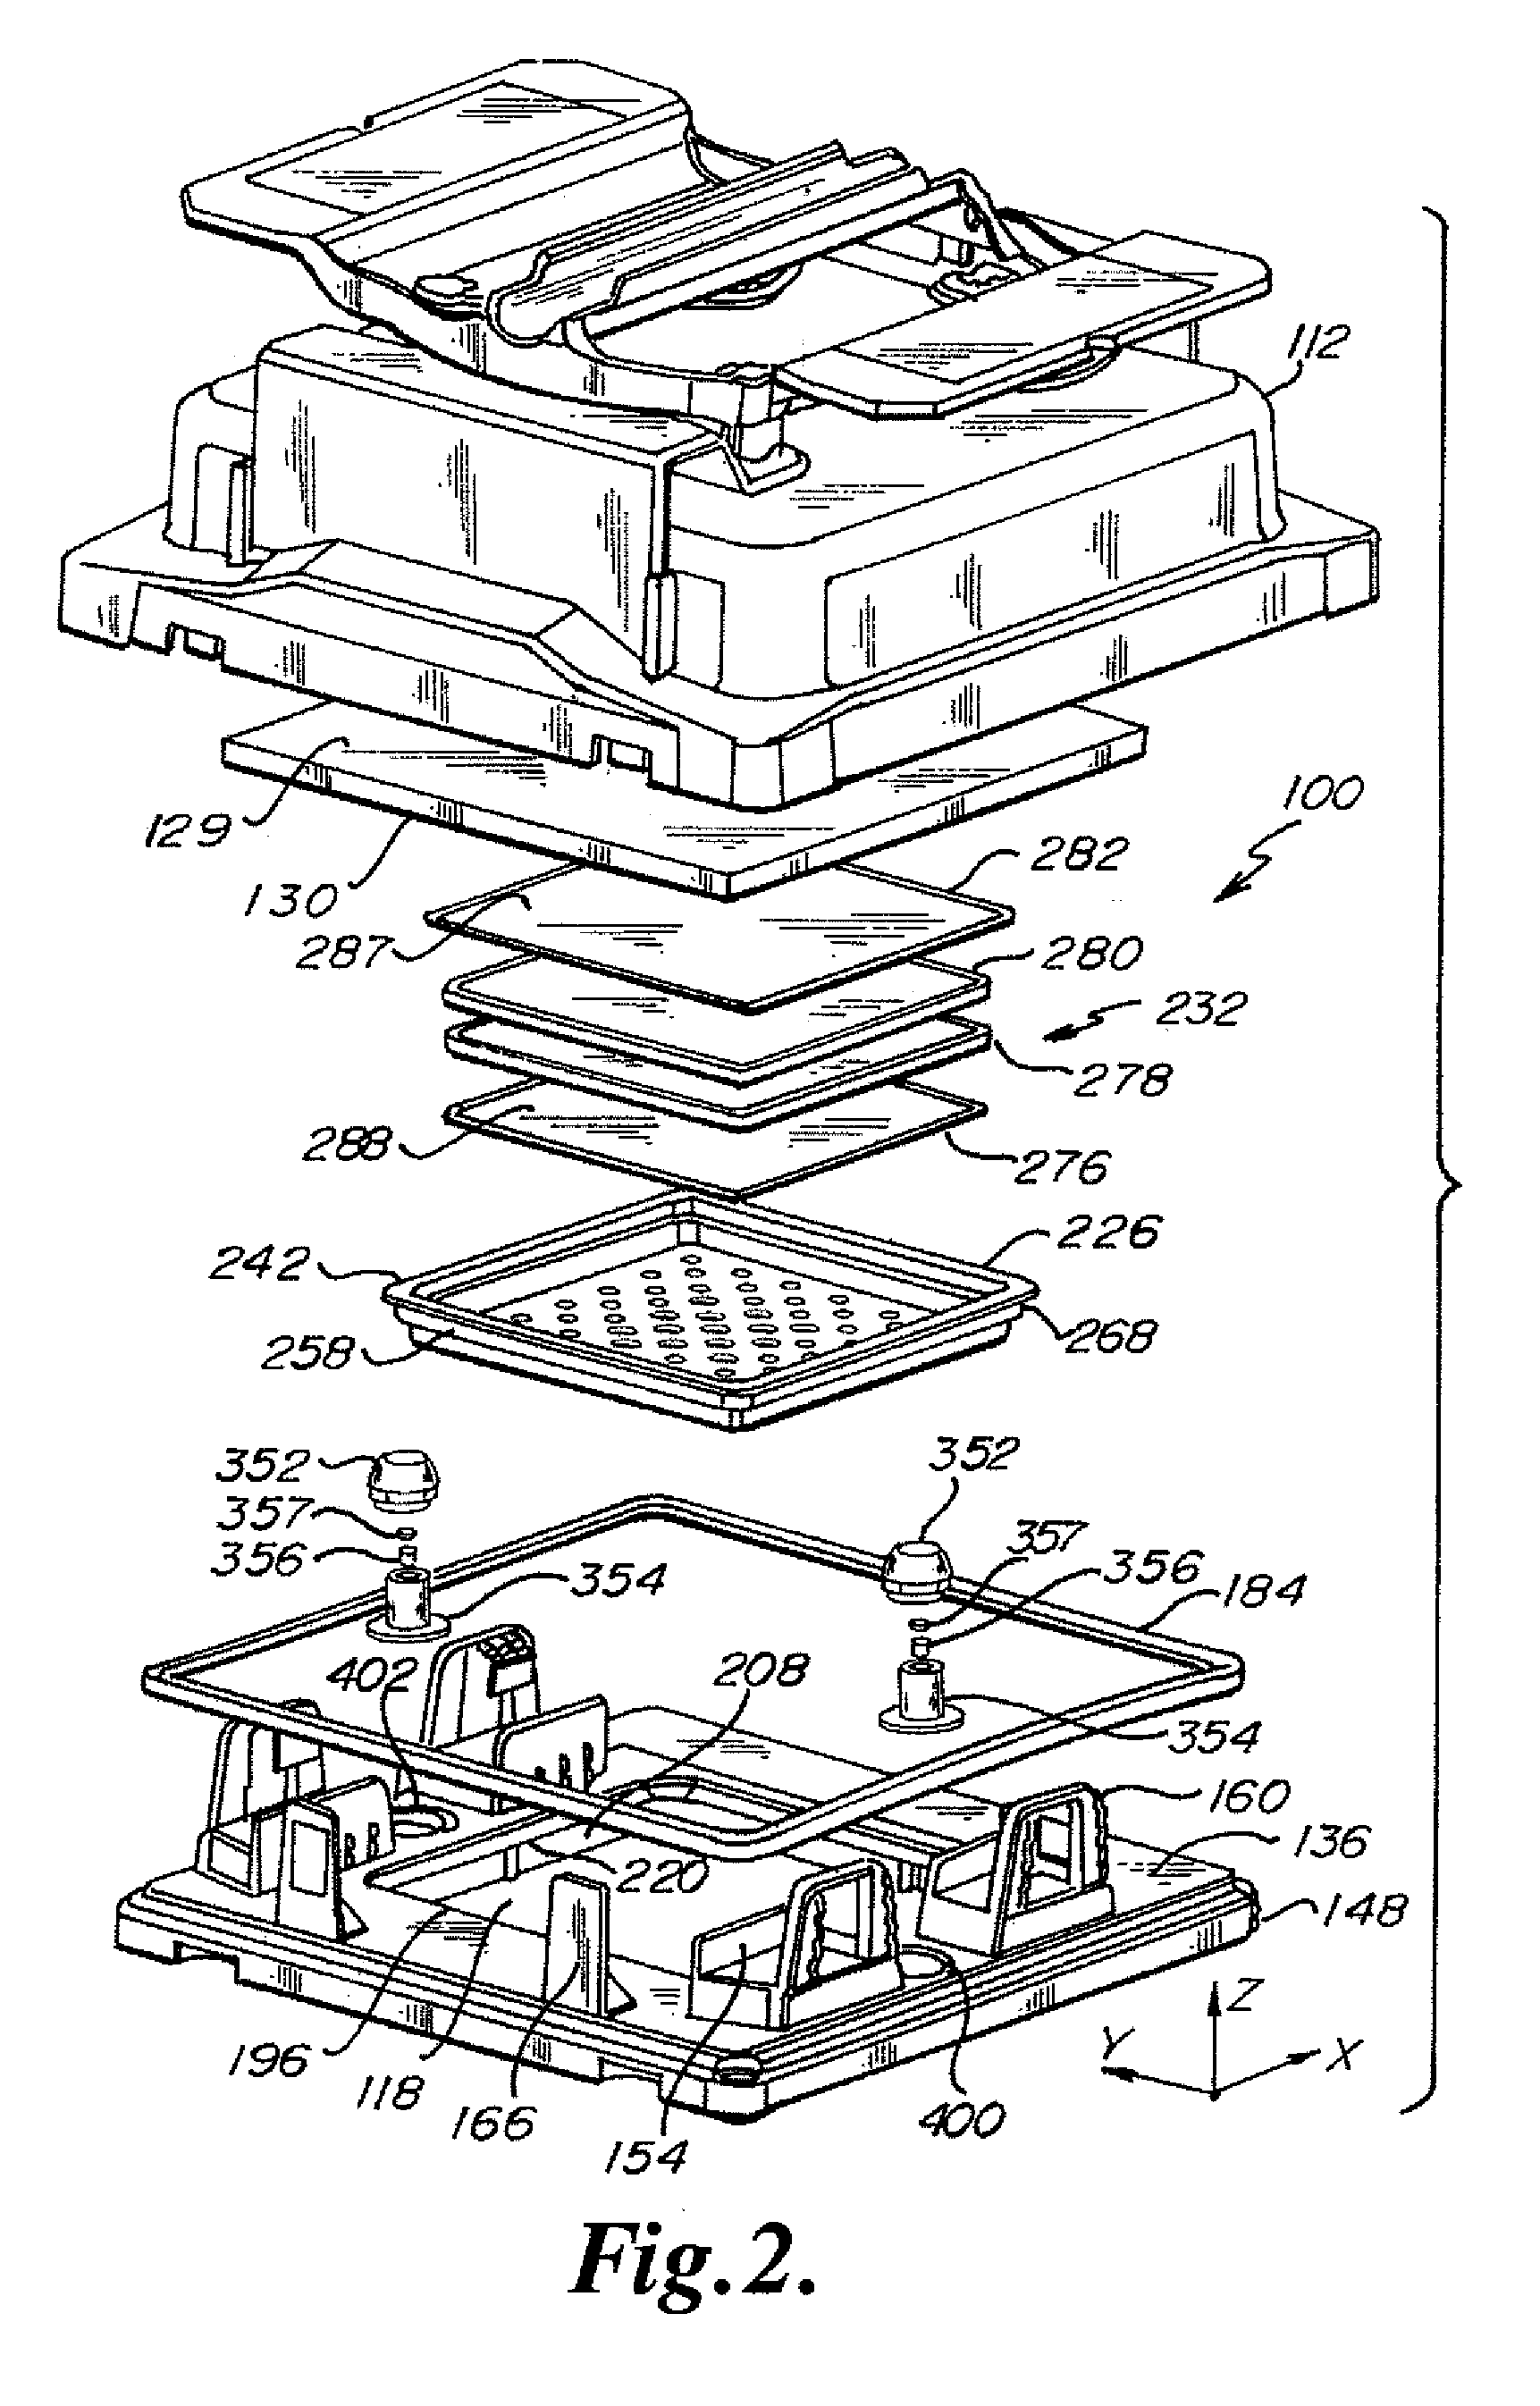 Purge system for a substrate container